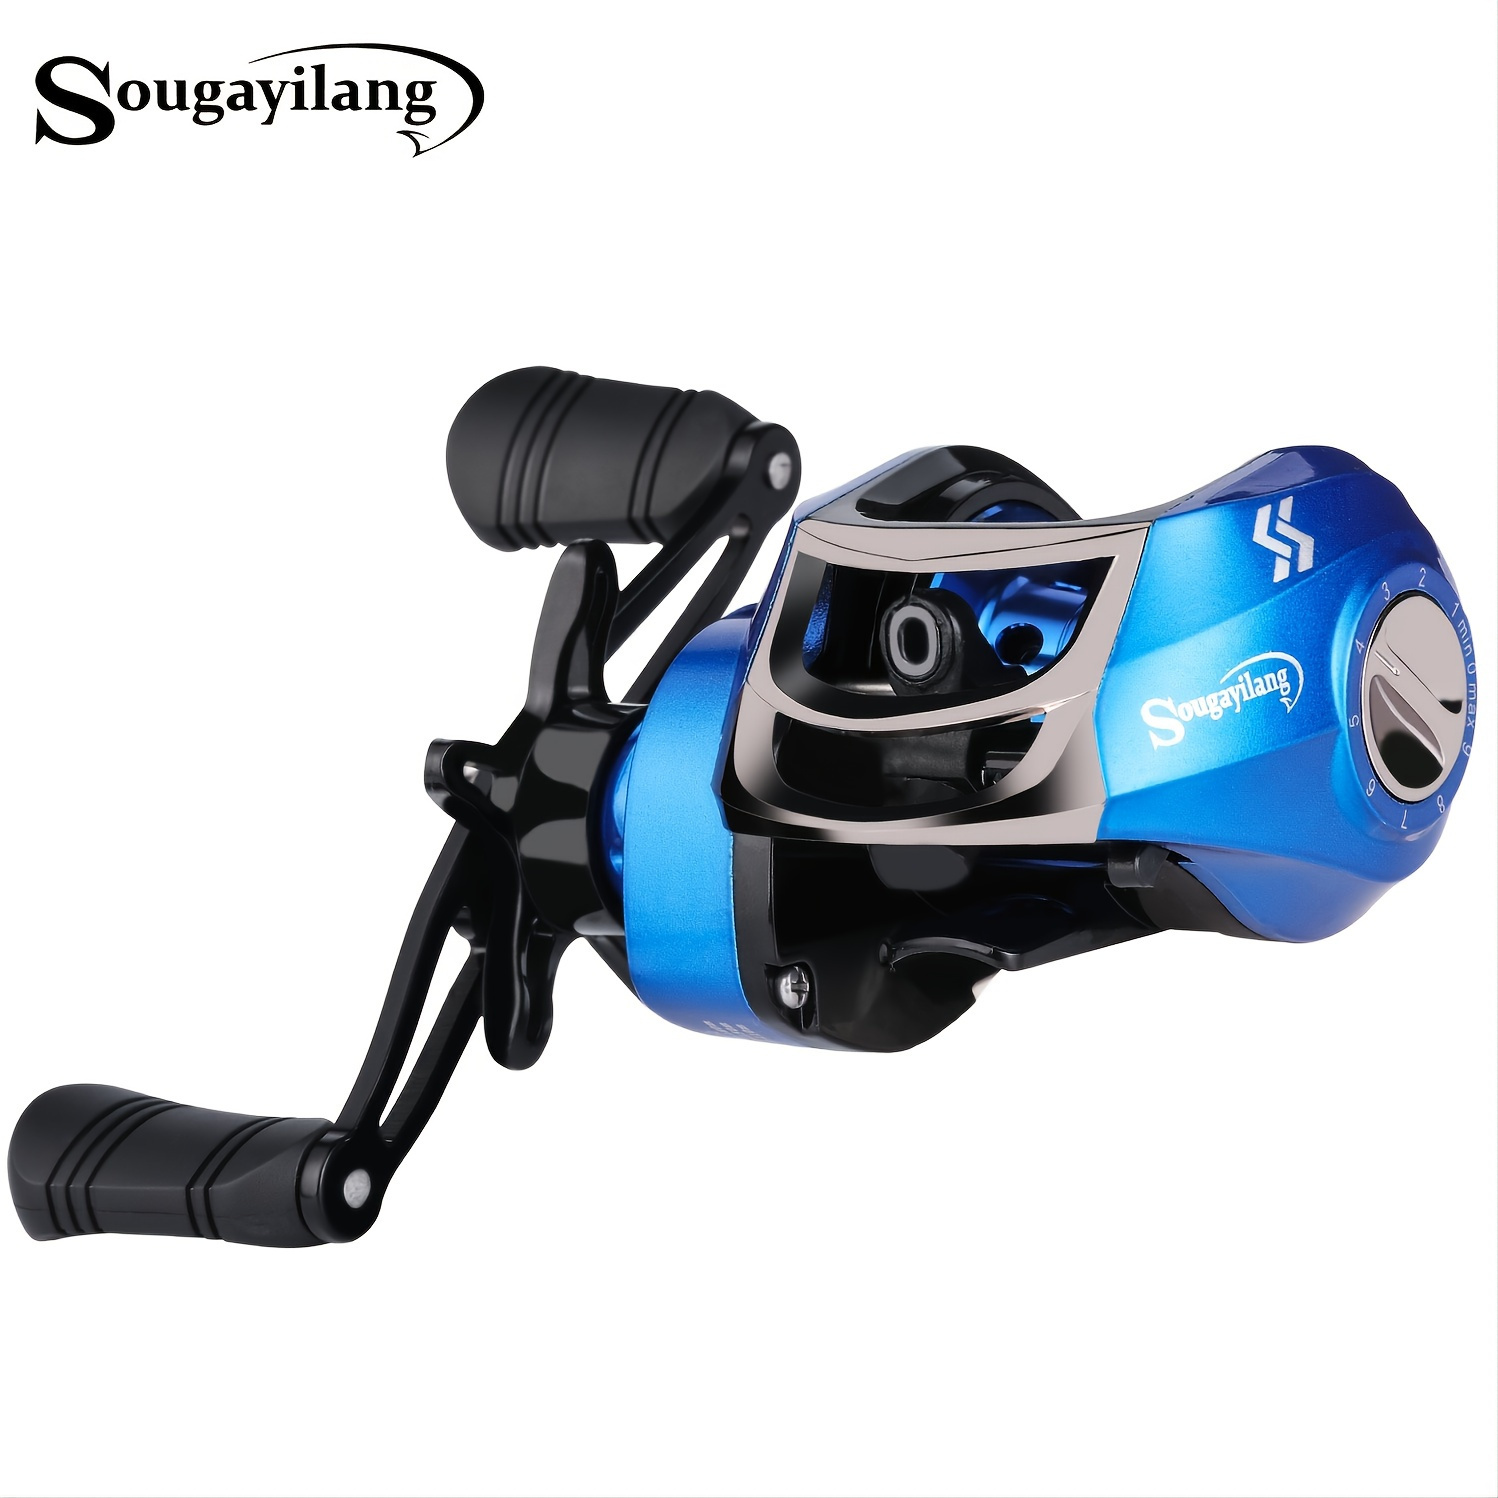 Sougayilang Baitcasting Fishing Rod and Reel Combo, Medium 6'/7' Low  Profile with SuperPolymer Handle